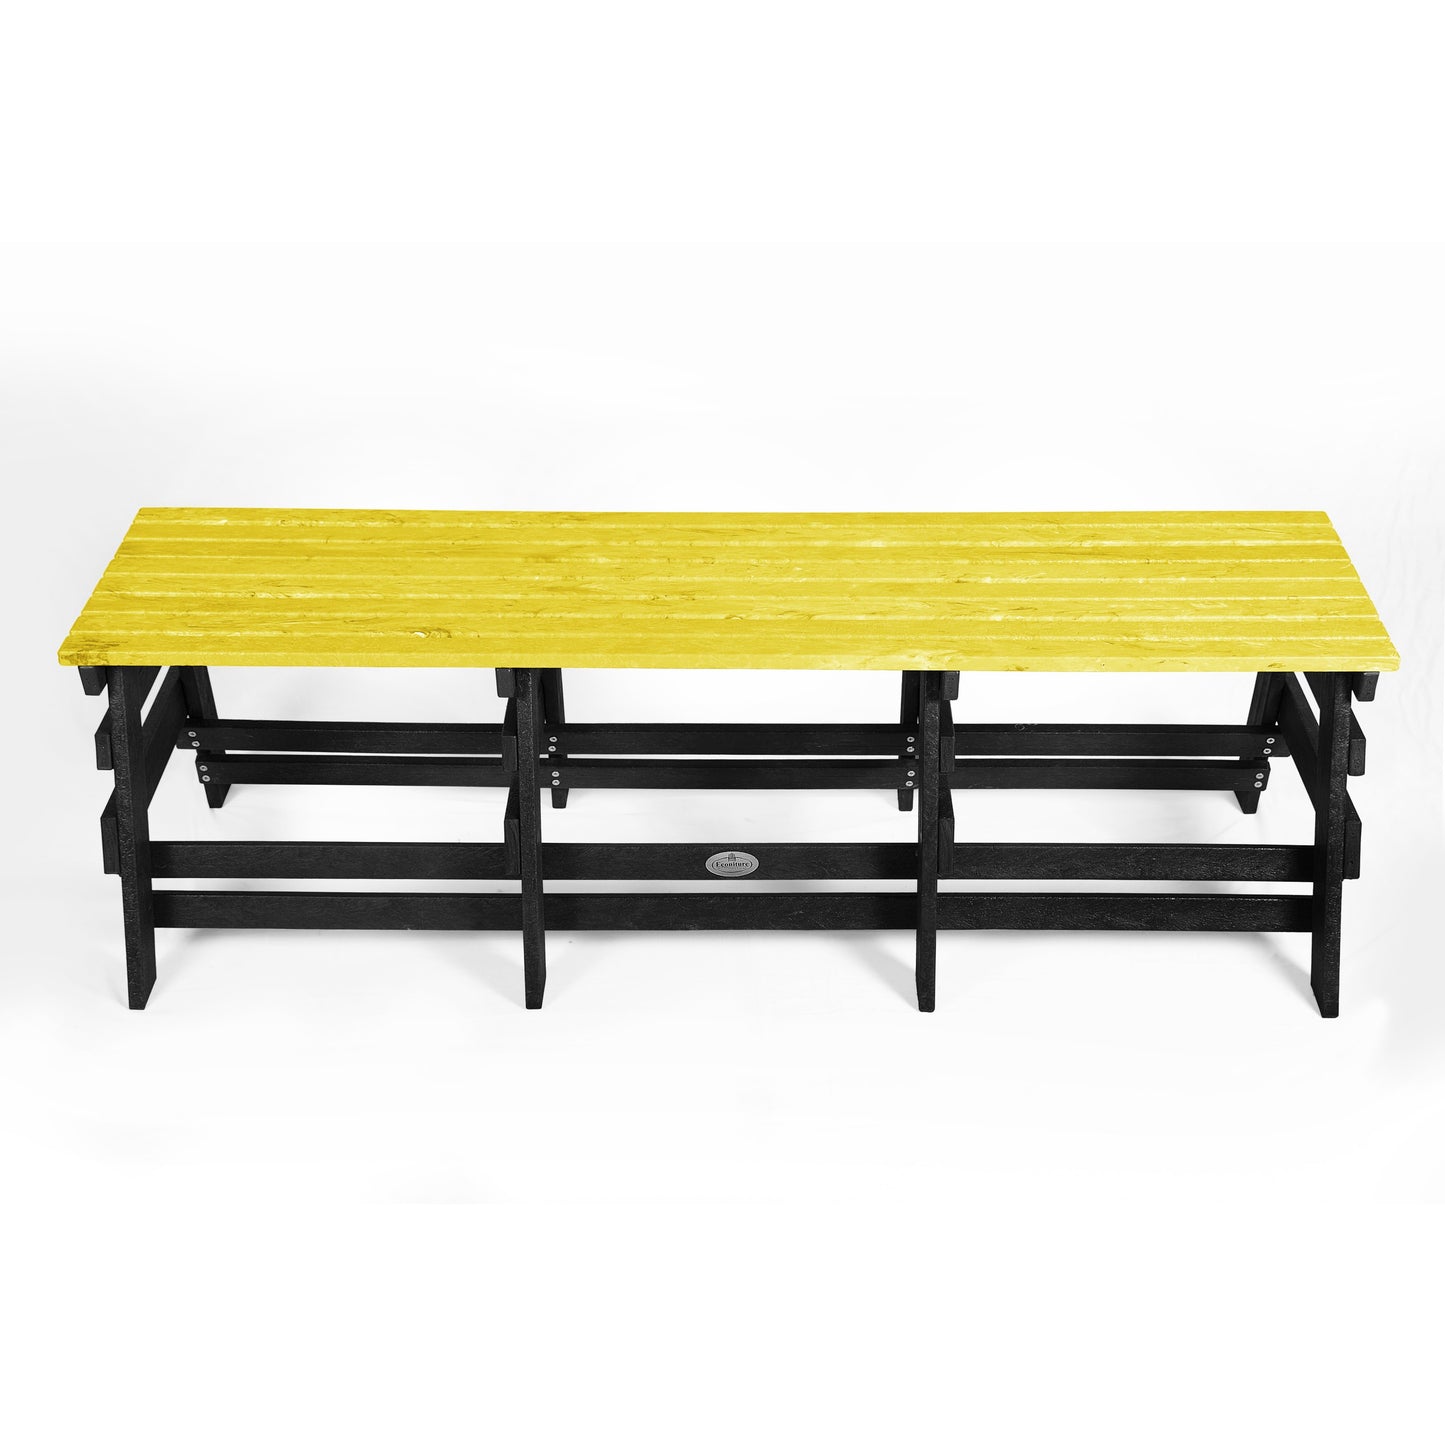 Eco 3 seater bench without backrest